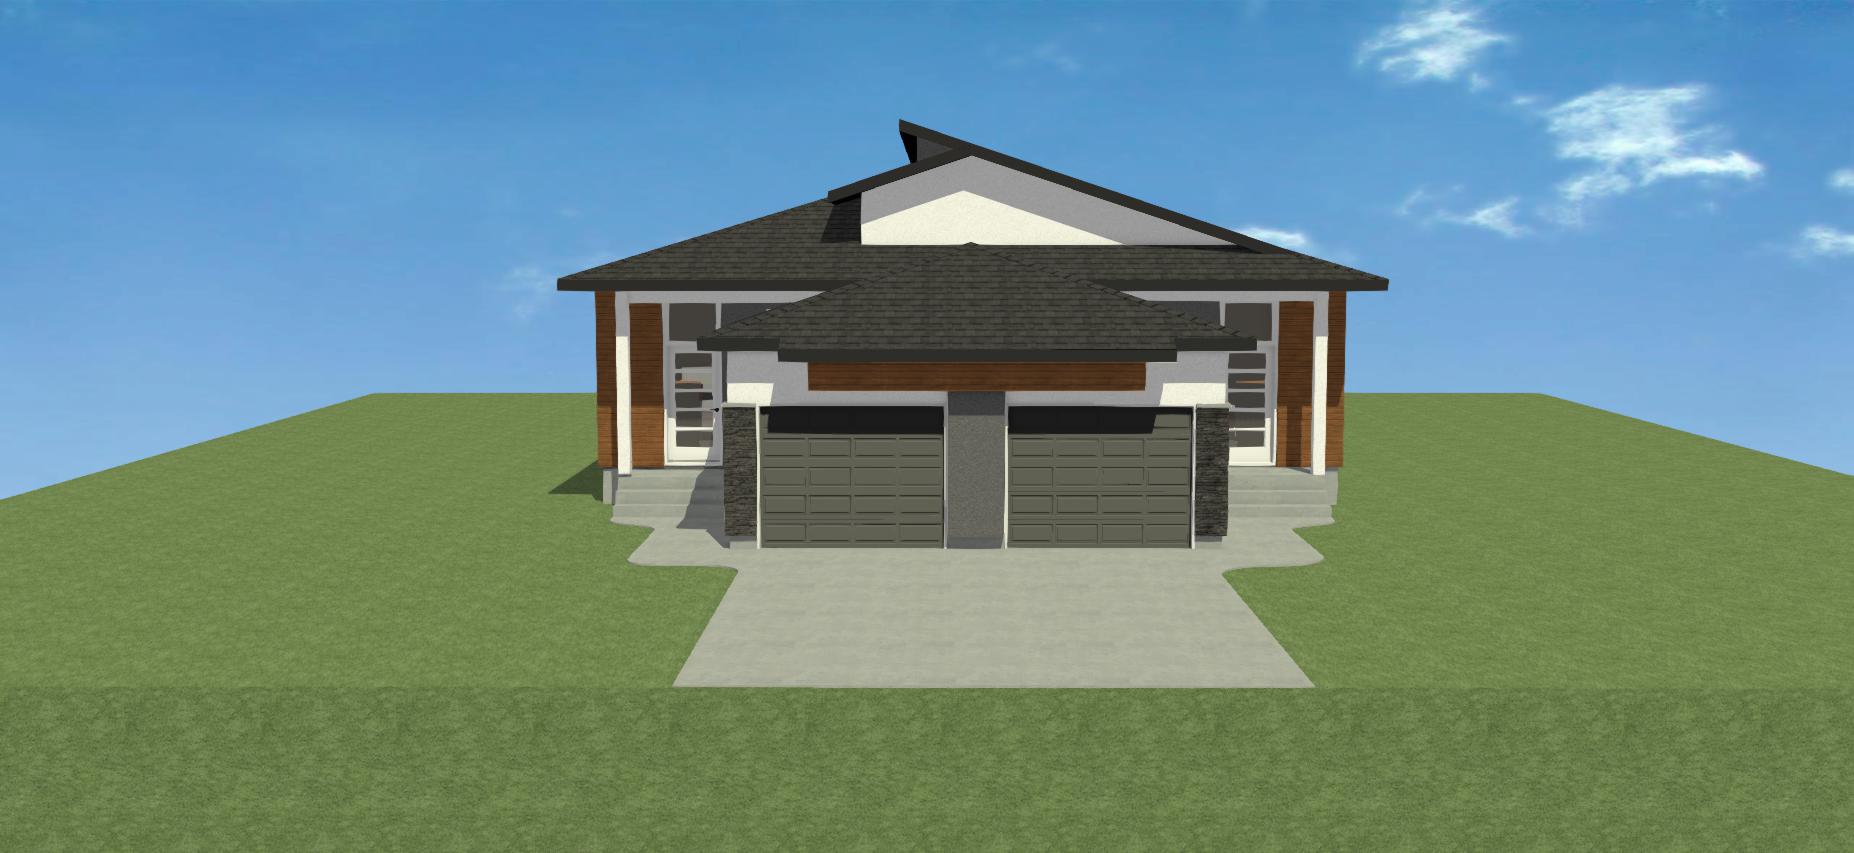 Raised Bungalow with Front Garage